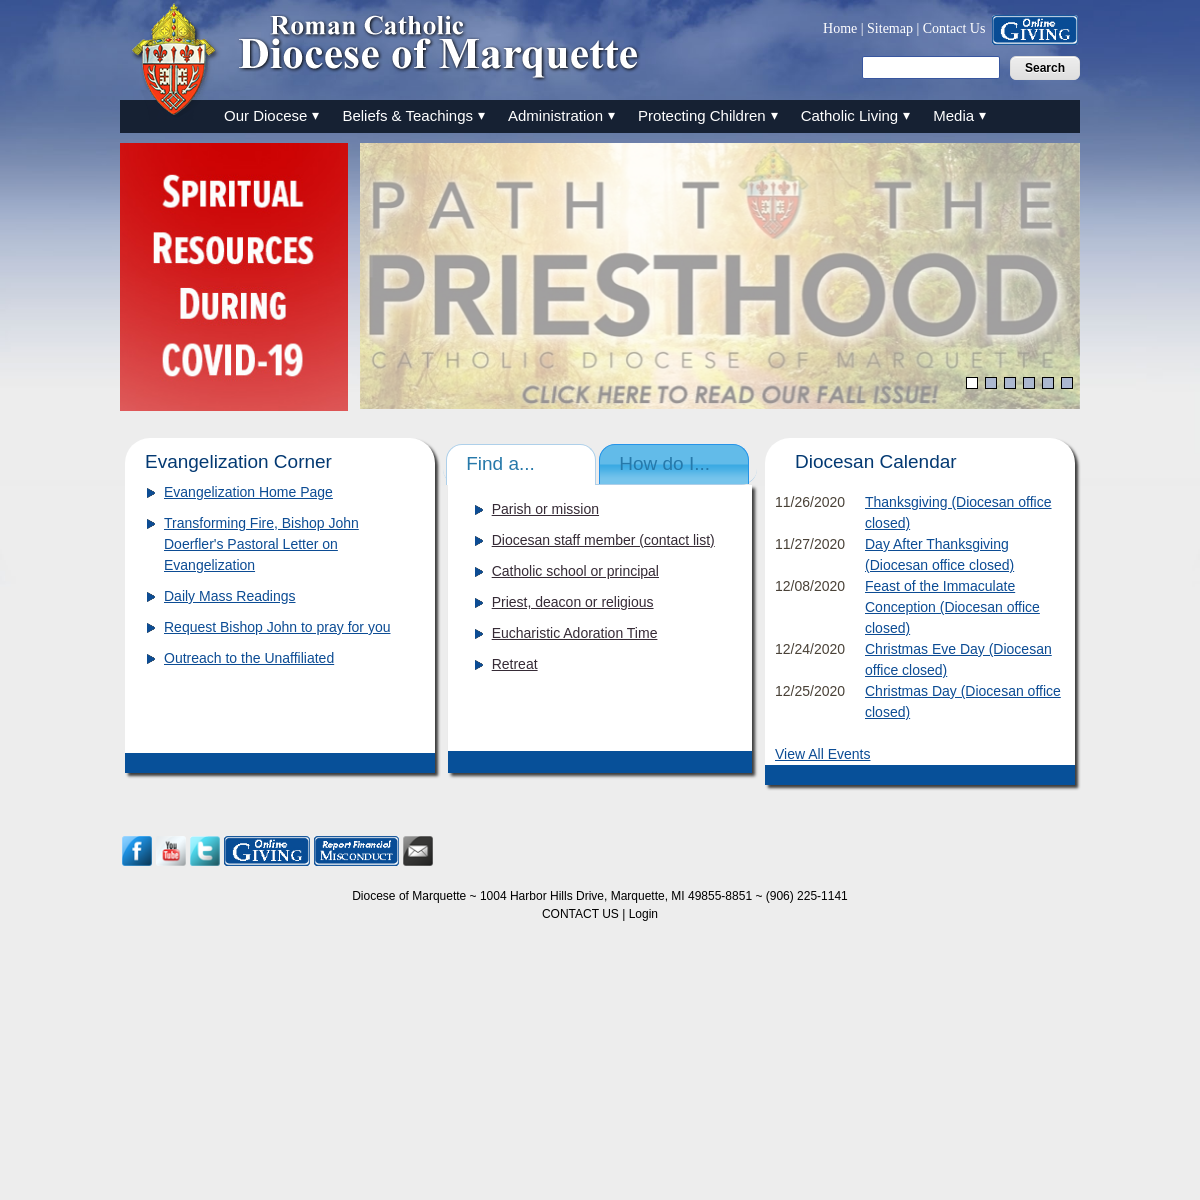 A complete backup of dioceseofmarquette.org